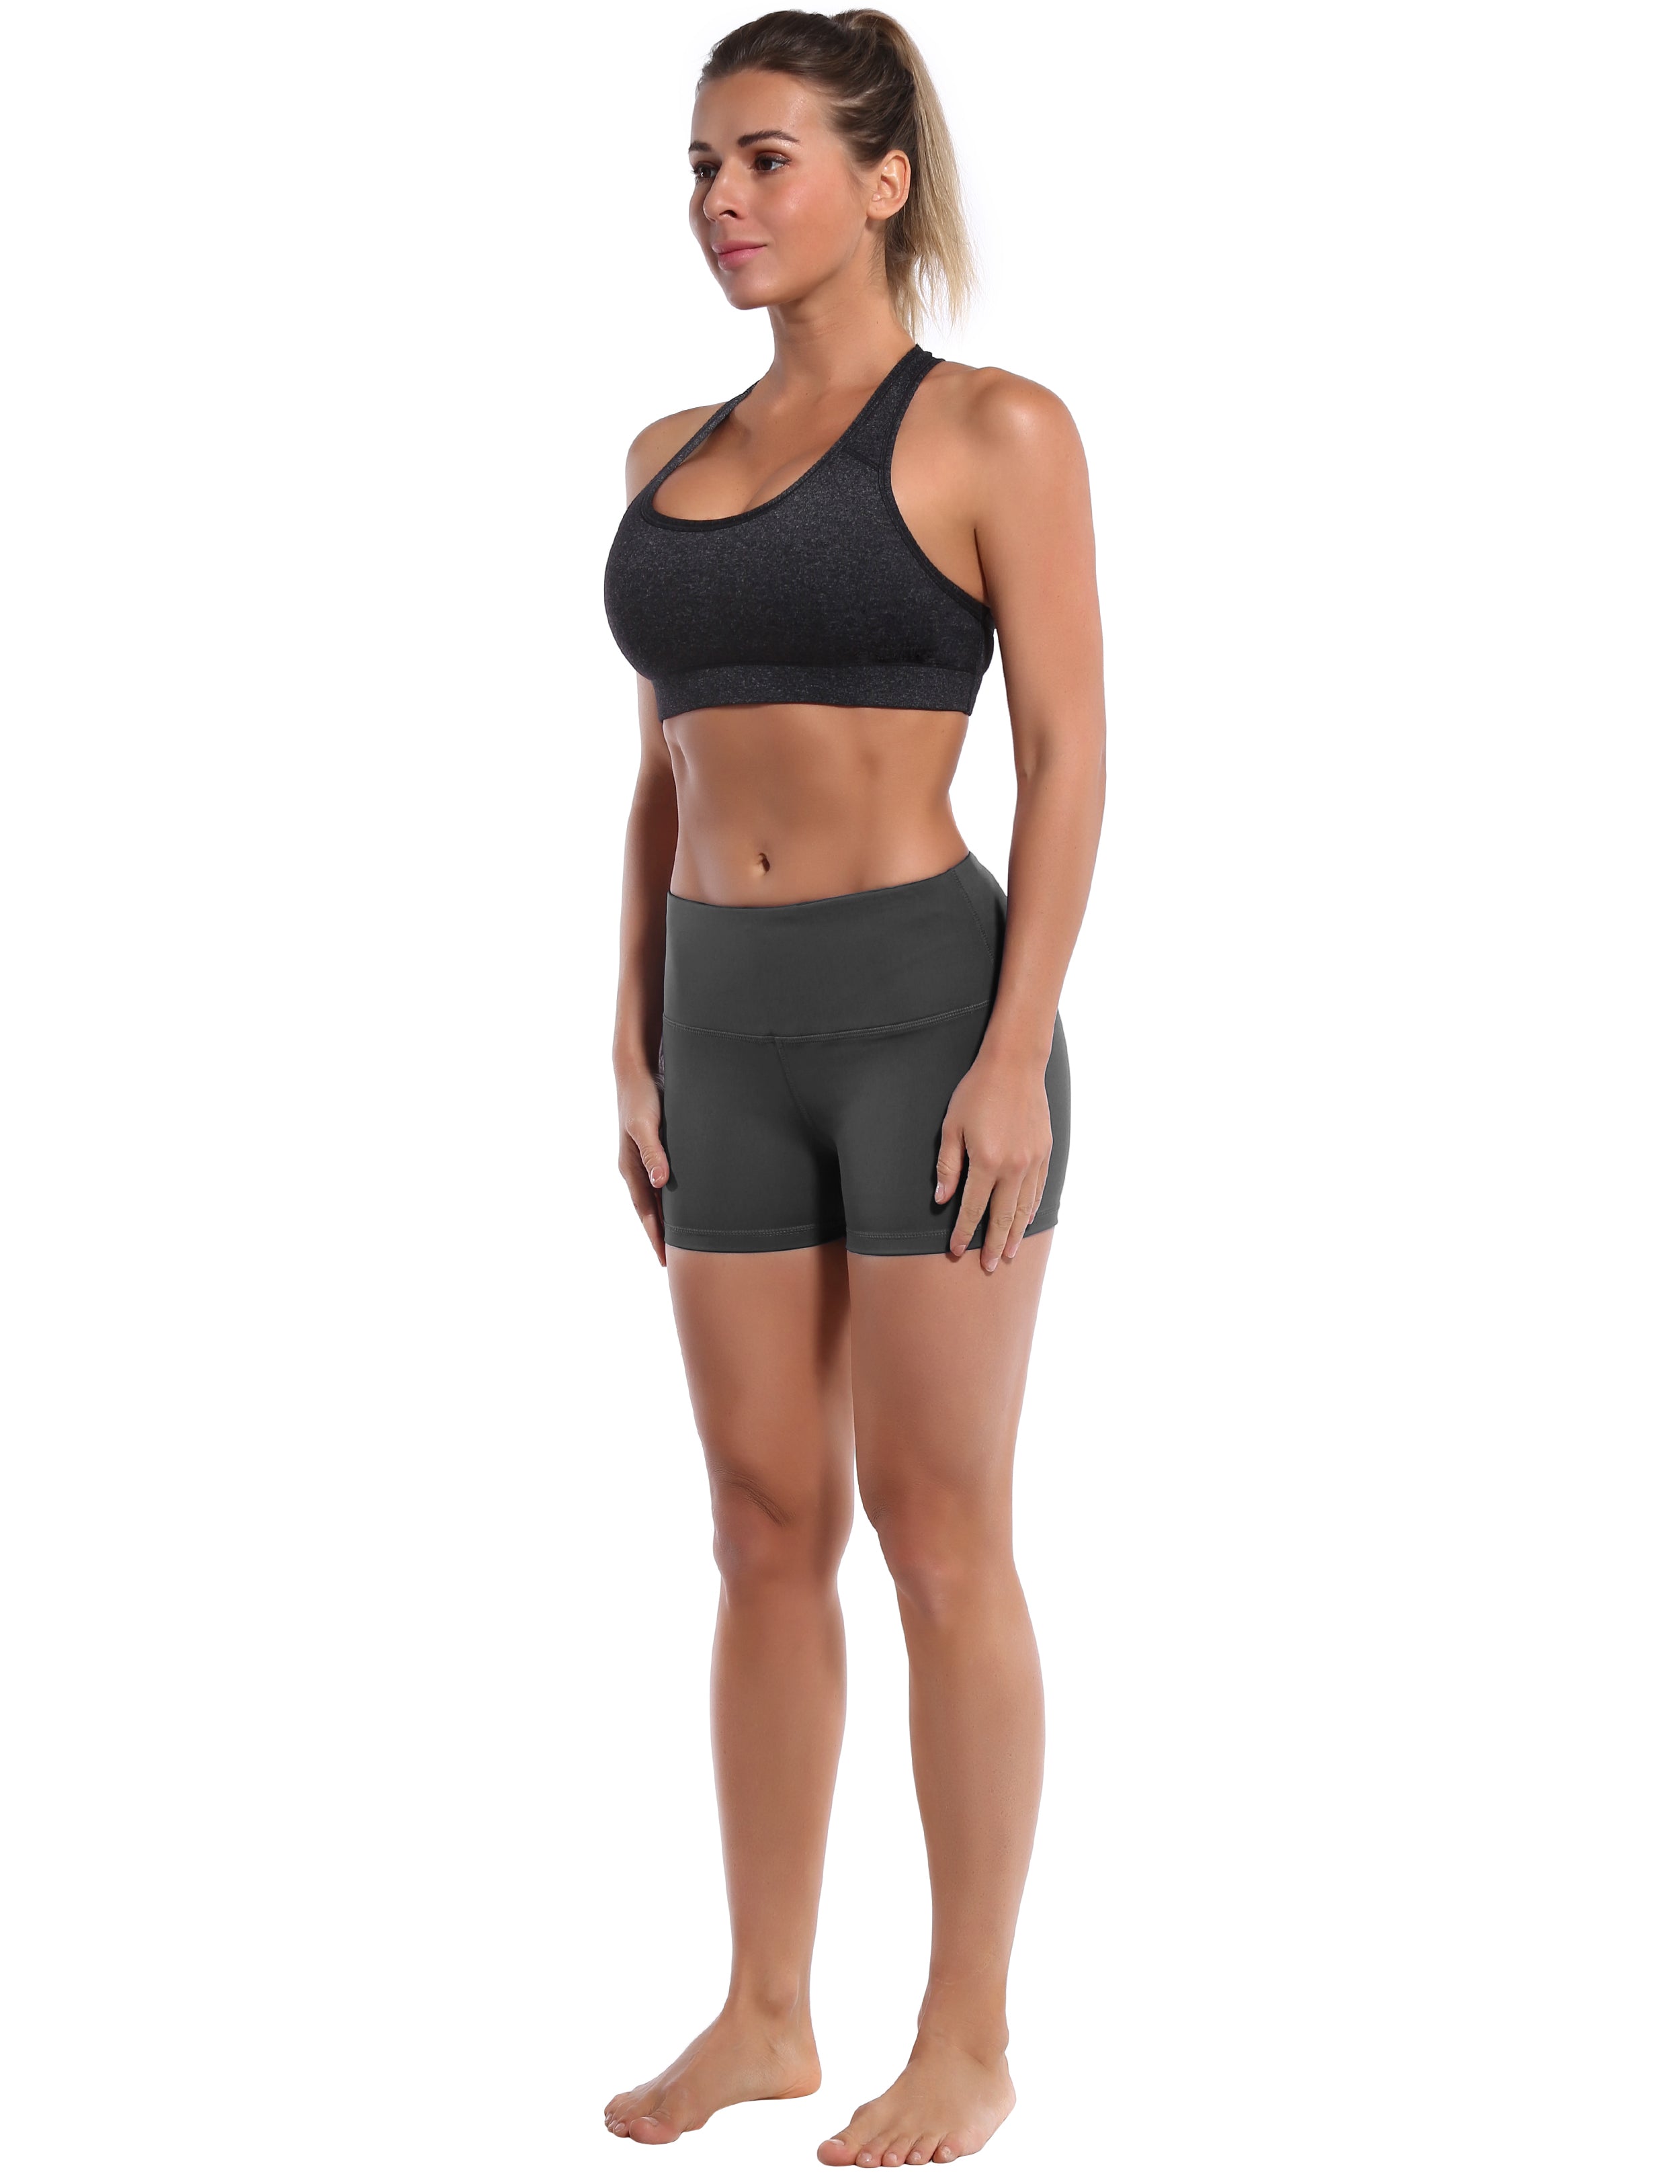 2.5" Pilates Shorts shadowcharcoal Softest-ever fabric High elasticity High density 4-way stretch Fabric doesn't attract lint easily No see-through Moisture-wicking Machine wash 75% Nylon, 25% Spandex